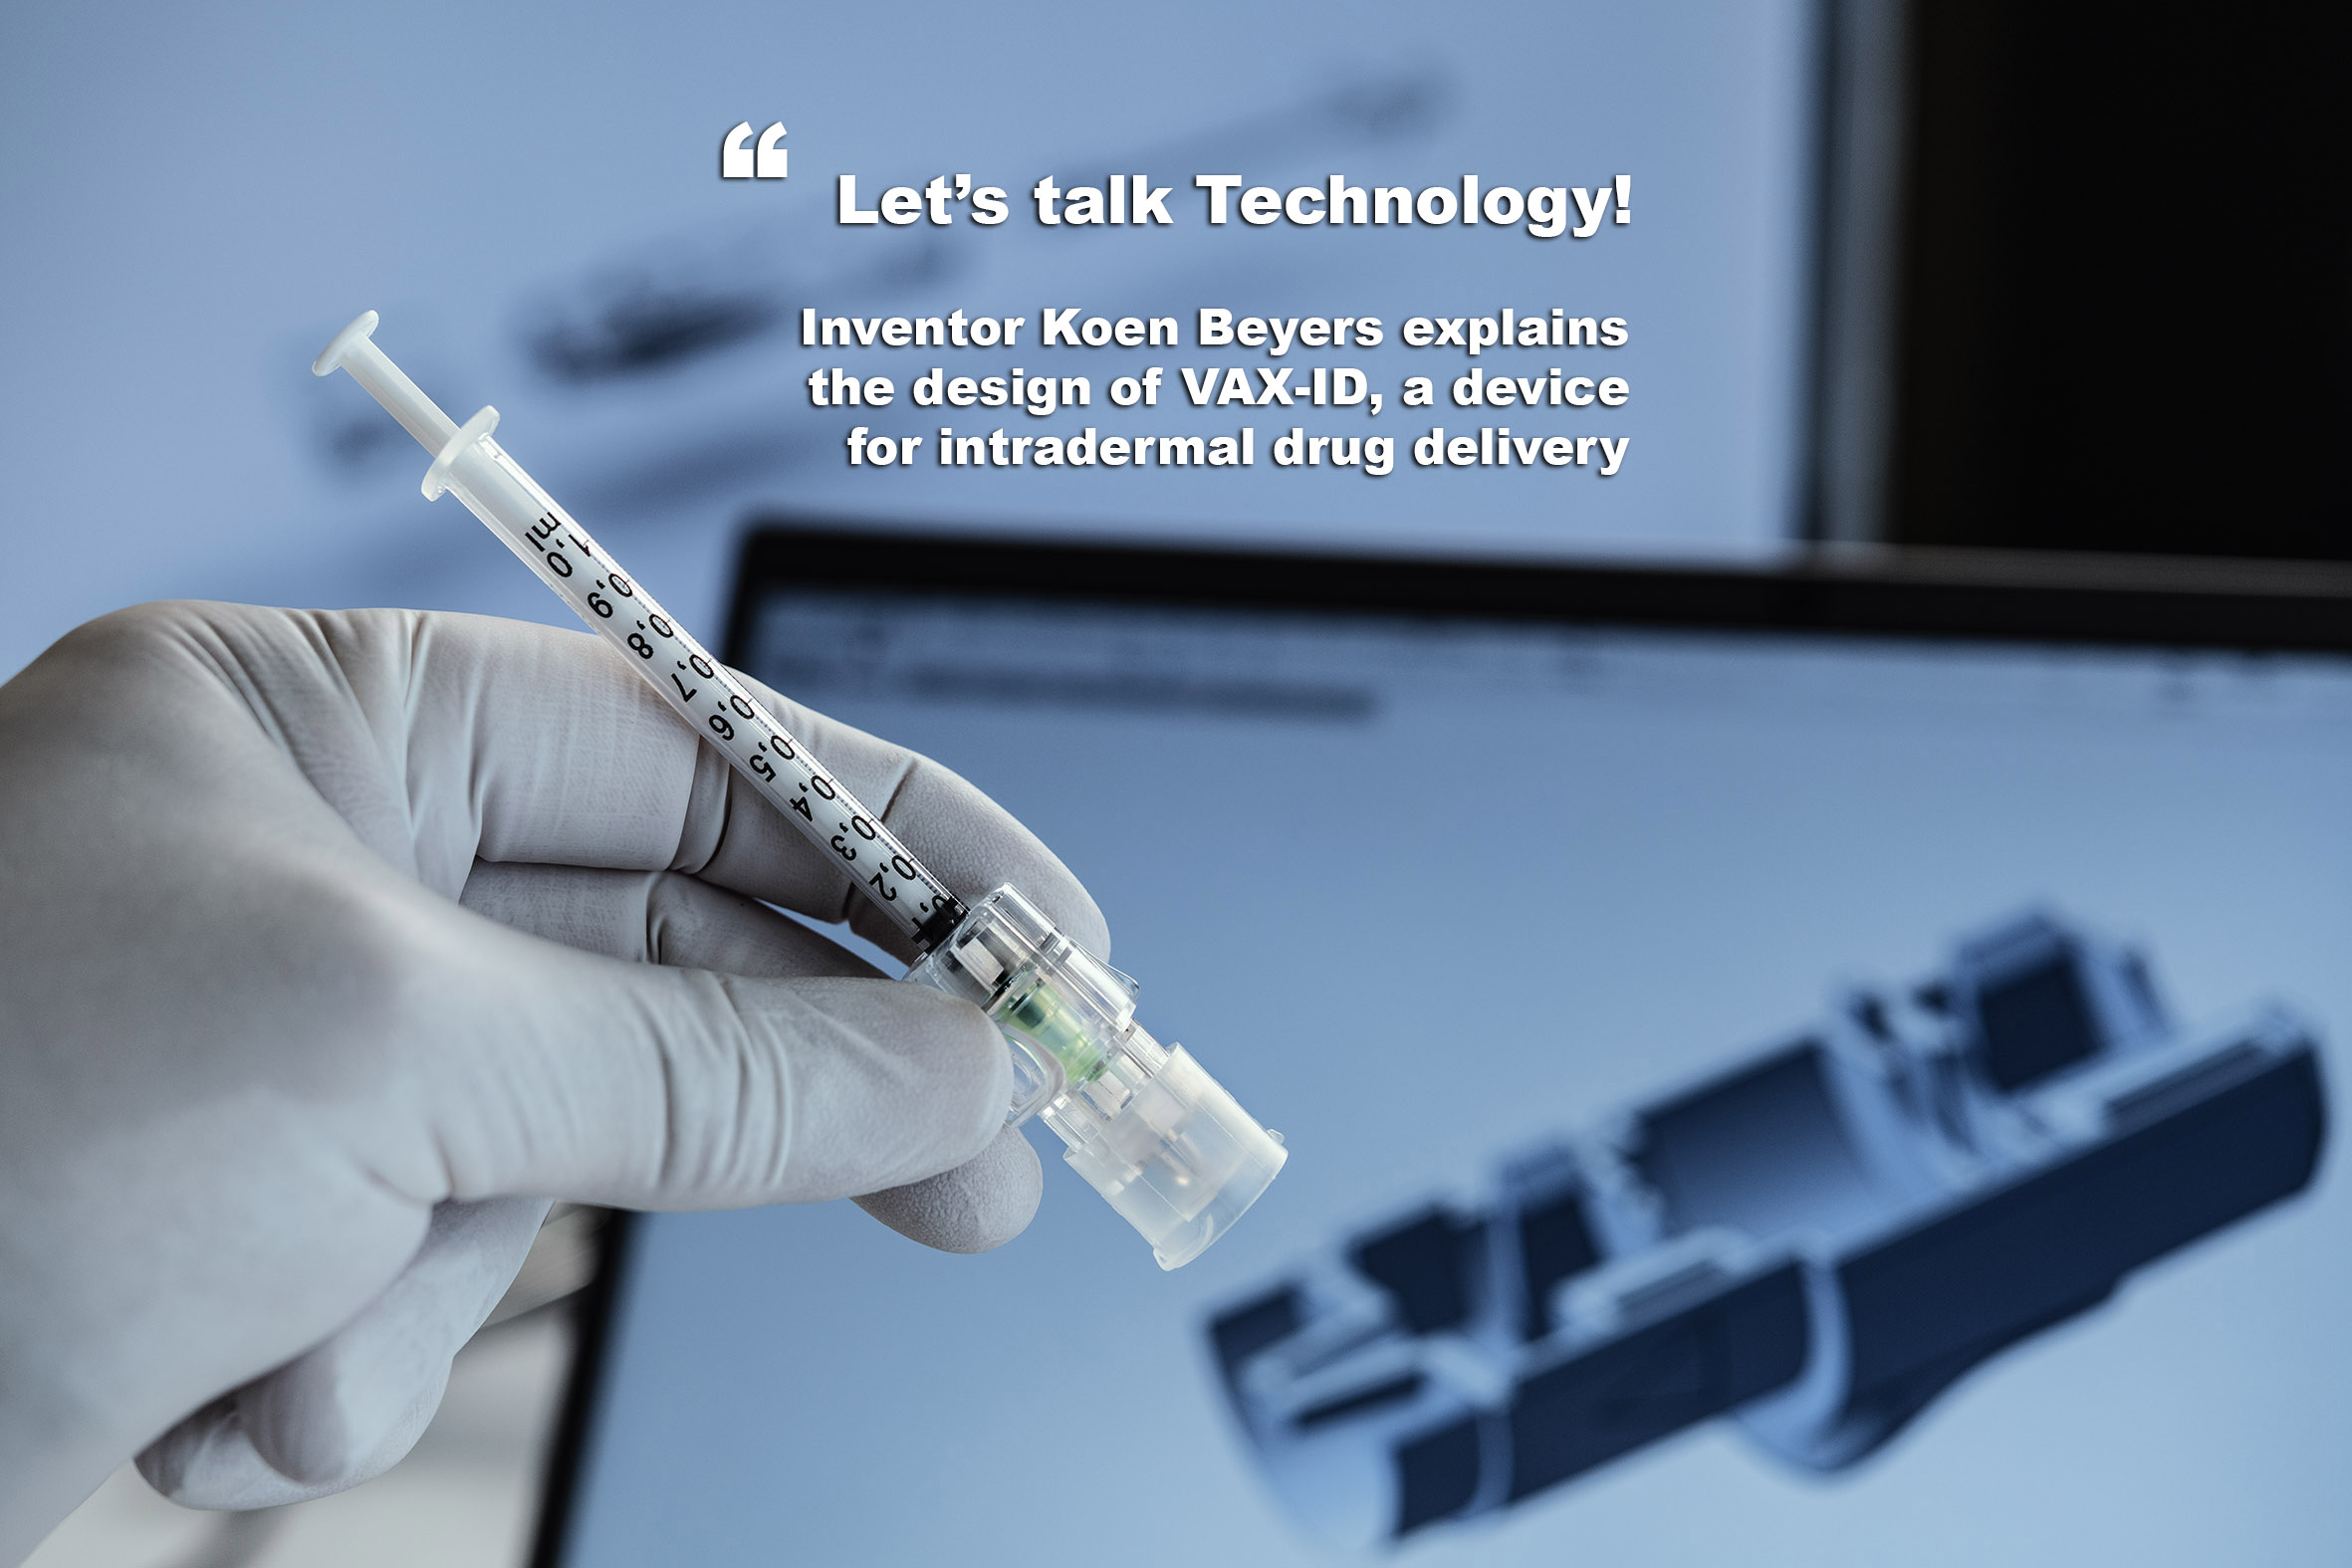 Technology talk on VAX-ID drug delivery device